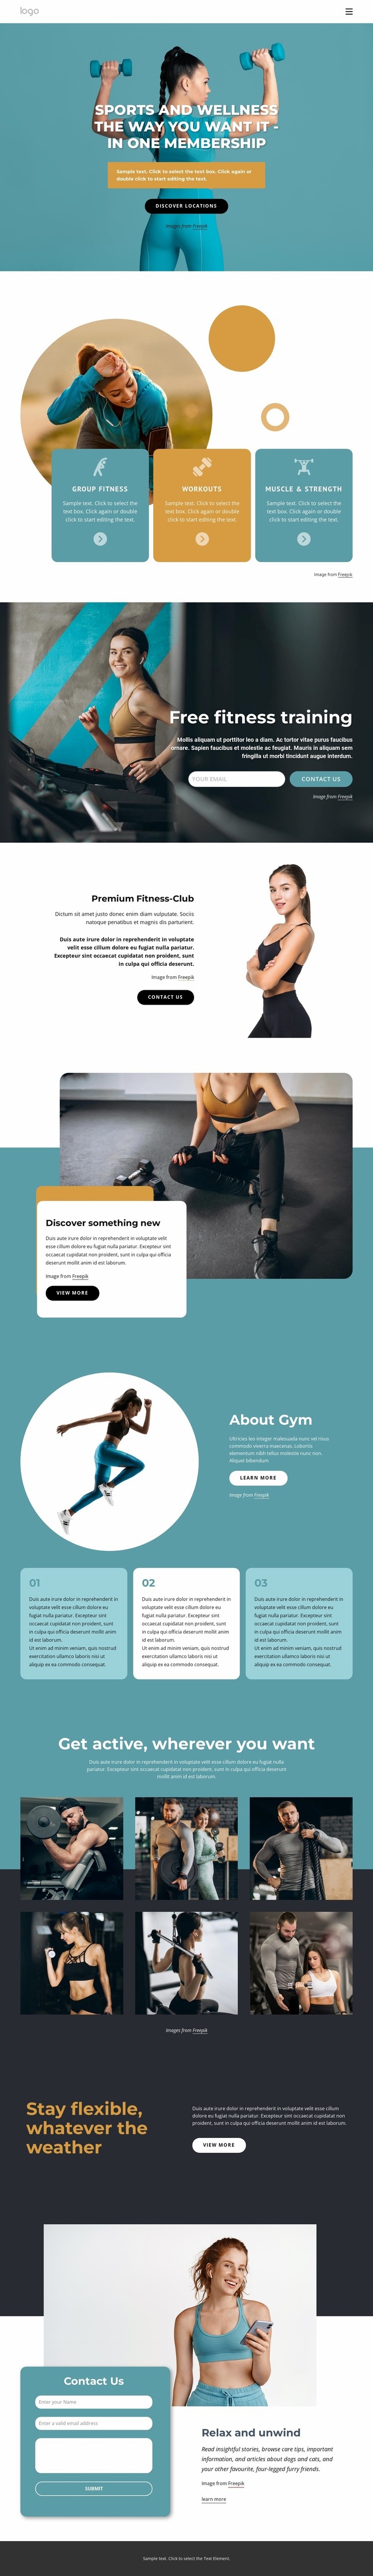 Workout anywhere with one membership Web Page Design